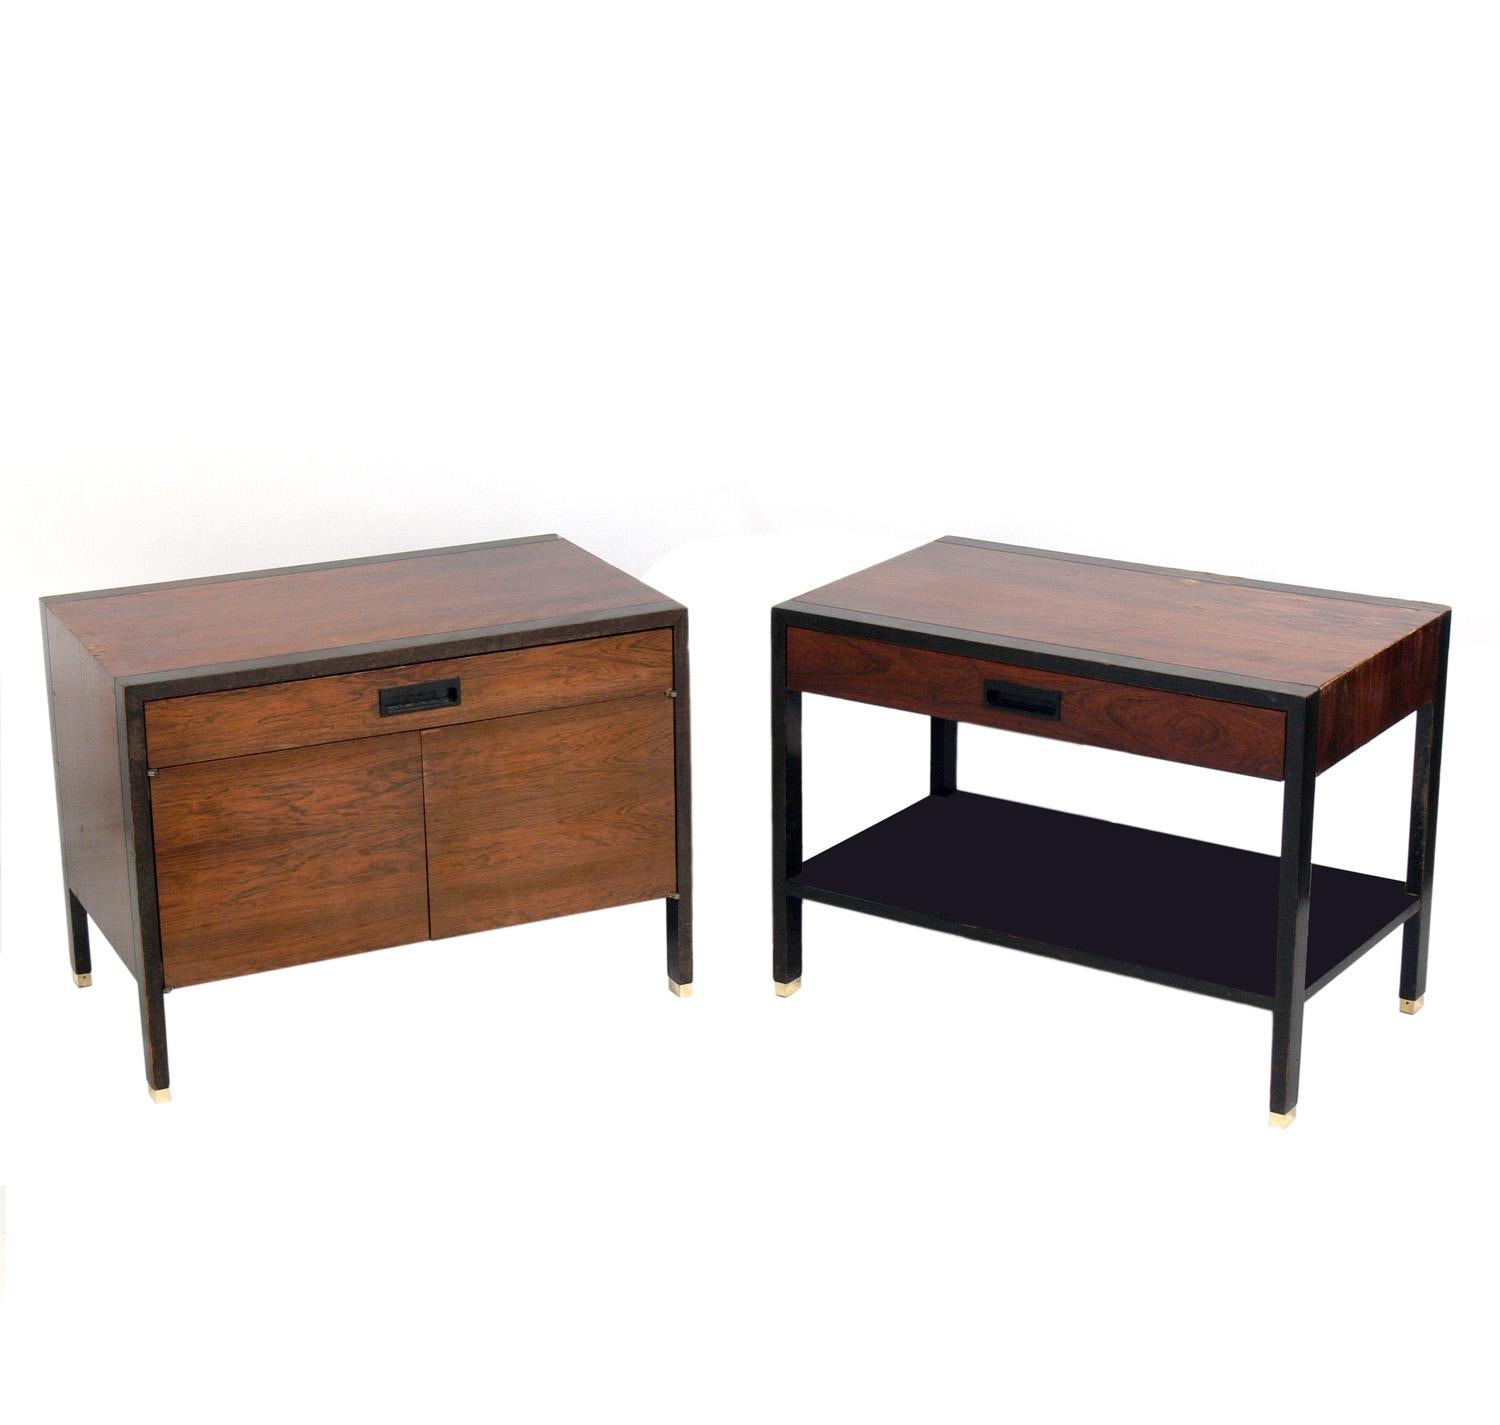 Selection of clean lined rosewood and mahogany nightstands, designed by Harvey Probber, American, circa 1960s. They are a versatile size and can be used in a bedroom as night stands, or in a living area as side or end tables. They are being